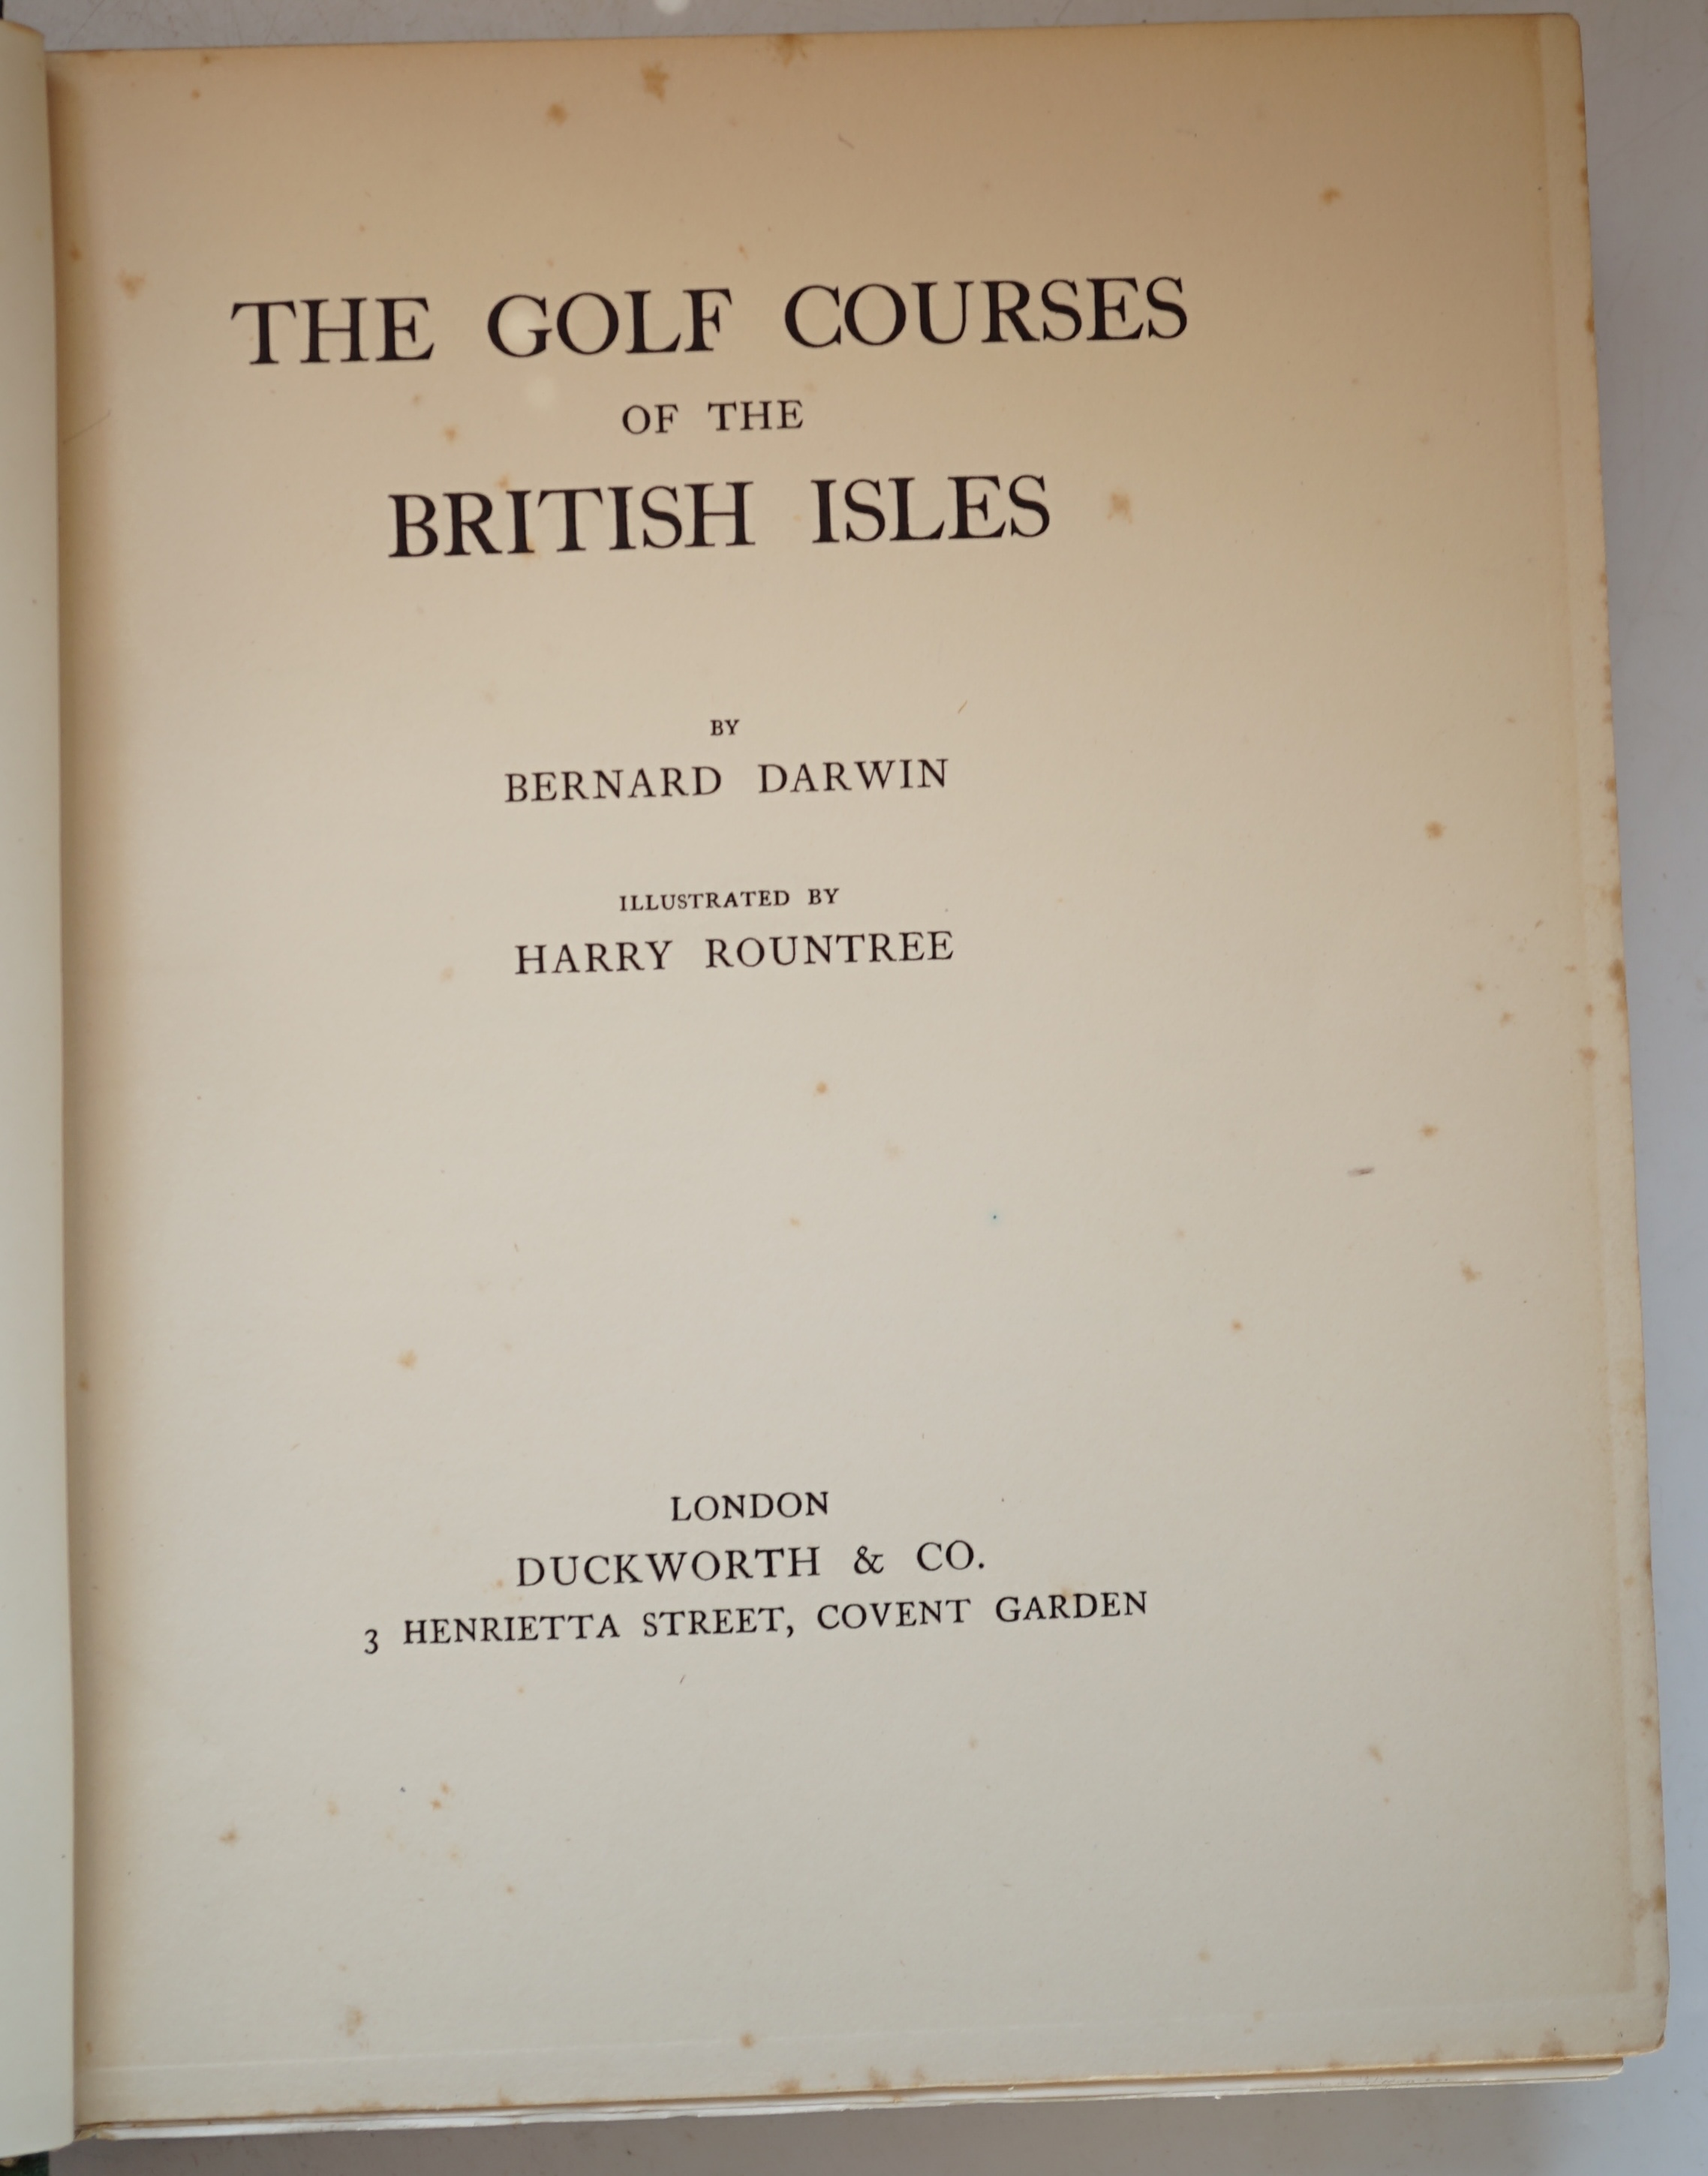 Darwin, Bernard - The Golf Courses of the British Isles, 1st edition, illustrated by Harry Rountree, with colour frontispiece and 44 colour plates, 4to, publisher's green pictorial cloth, some spotting, Duckworth, London